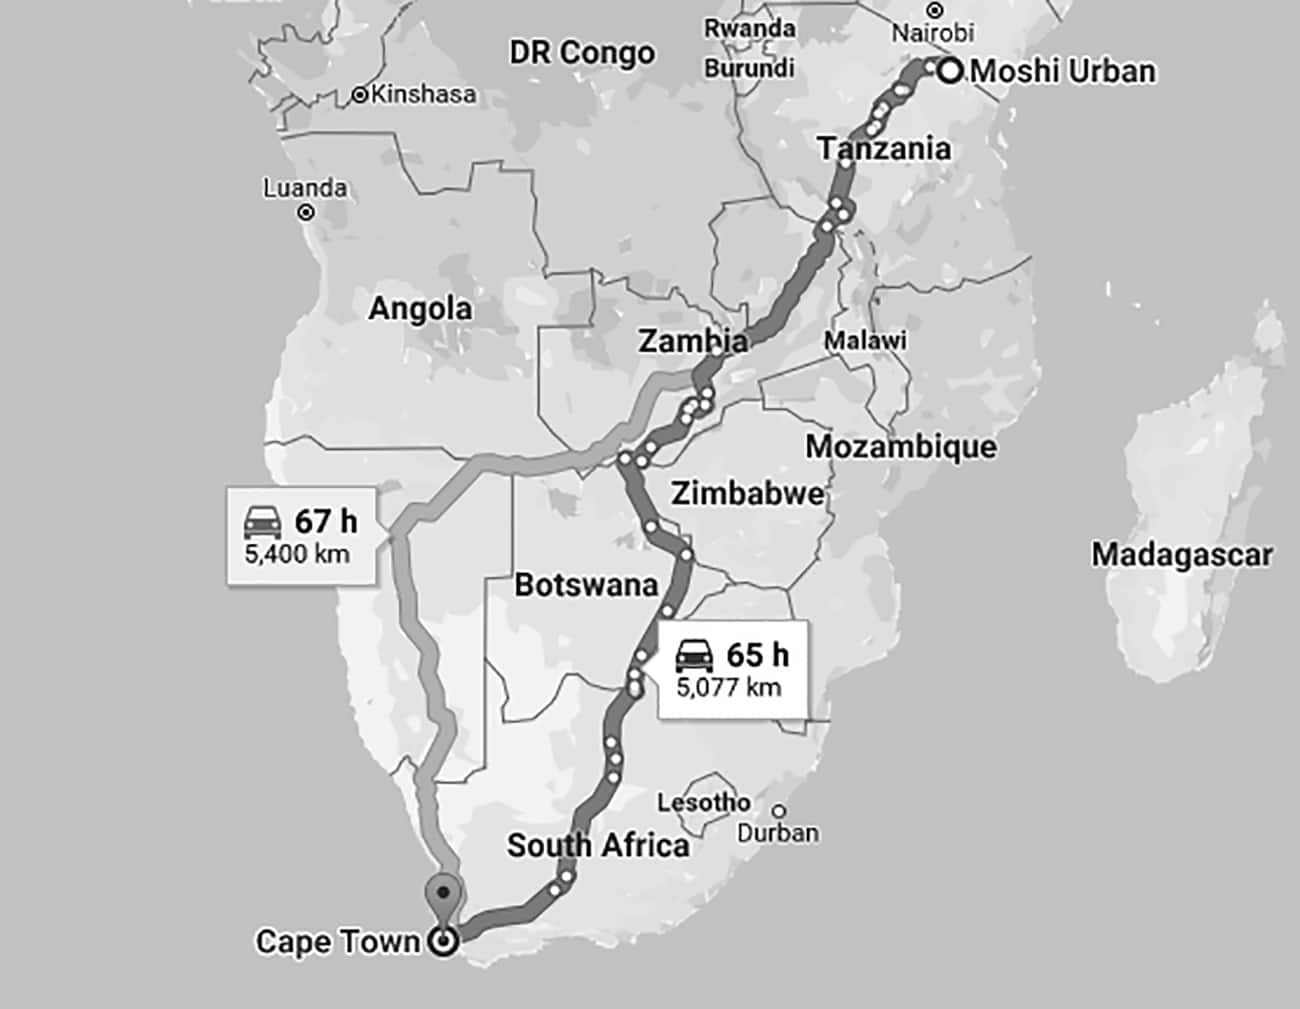 Tanzania to South Africa Route